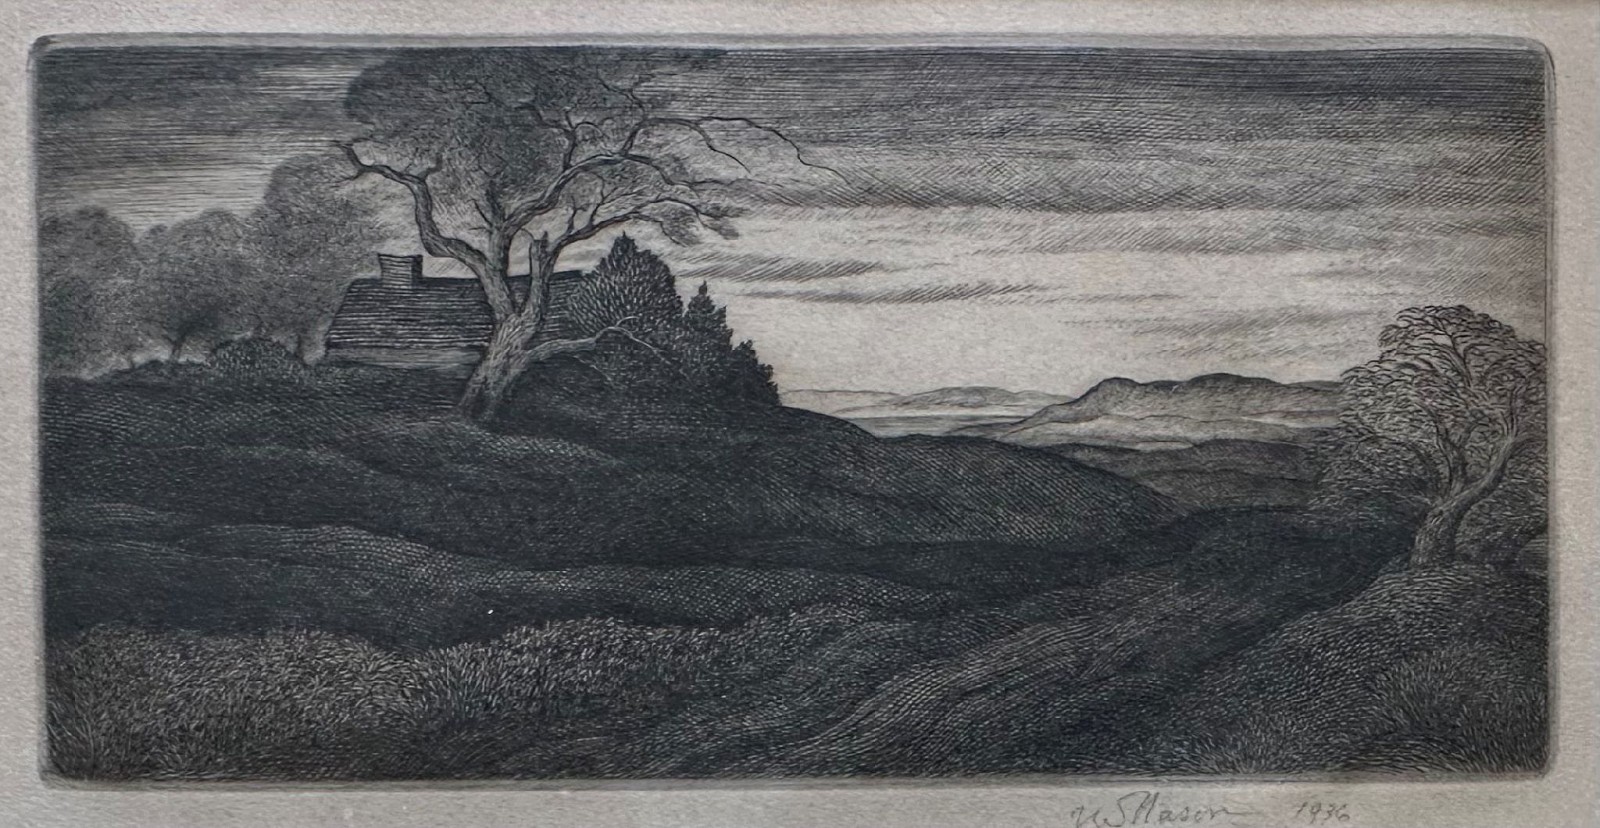 Thomas Willoughby Nason, Road To The Sea, 1931
copper engraving on paper, 3"" x 5 5/8""
JCA 6812
$850